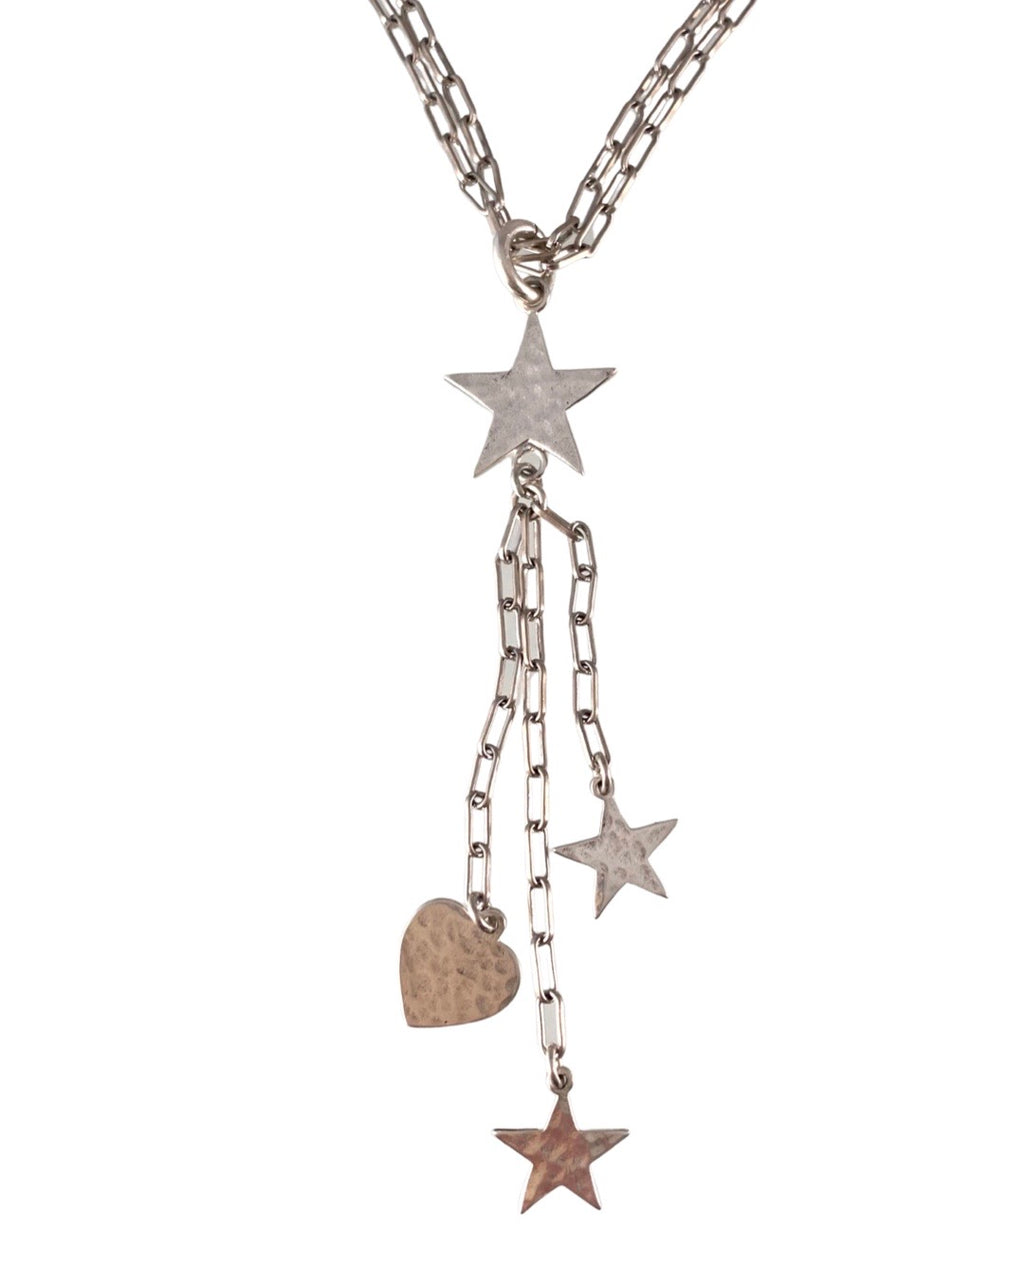 16" Sterling Silver Streaming Star and Heart Charm Necklace